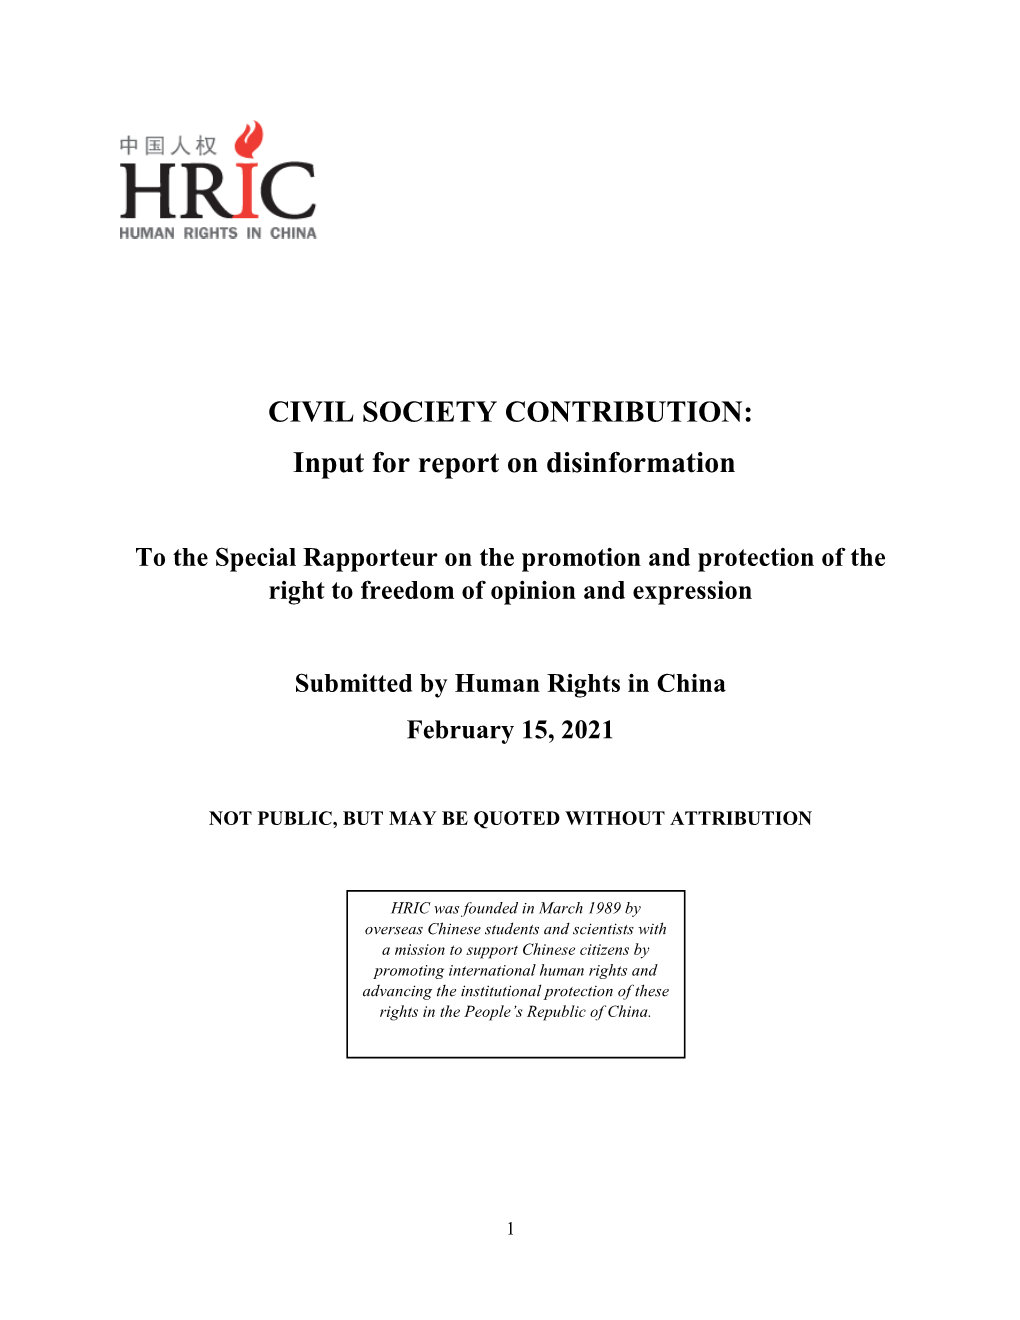 CIVIL SOCIETY CONTRIBUTION: Input for Report on Disinformation